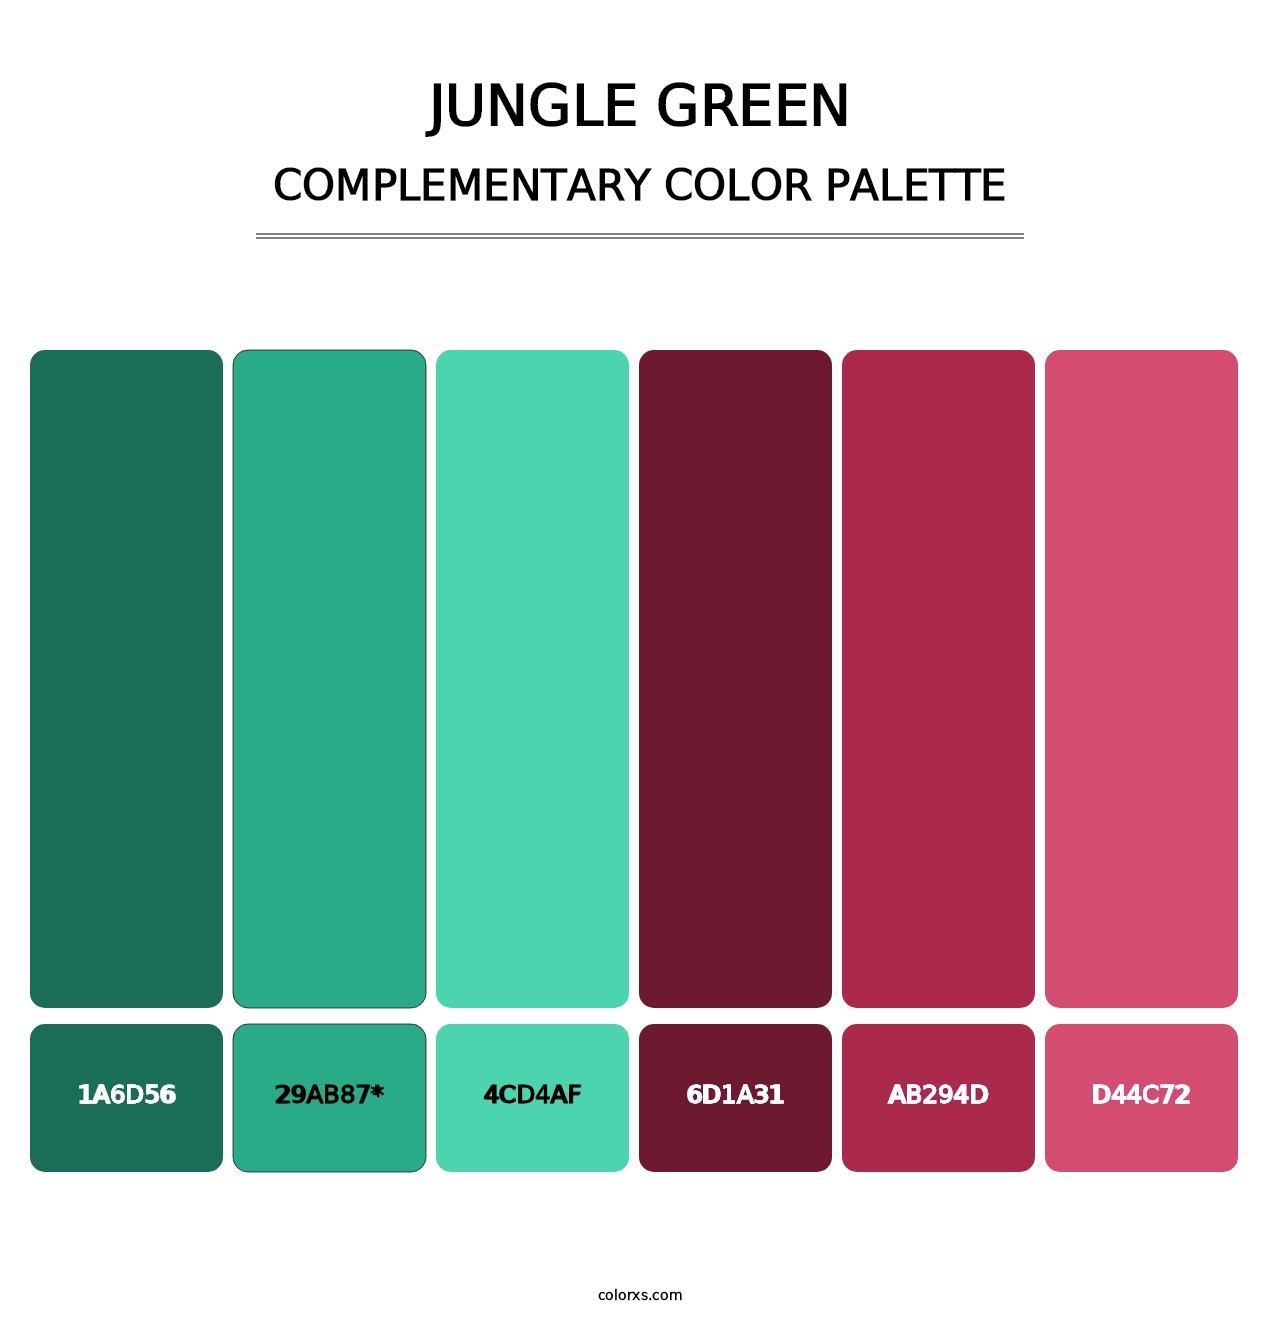 Jungle Green - Complementary Color Palette